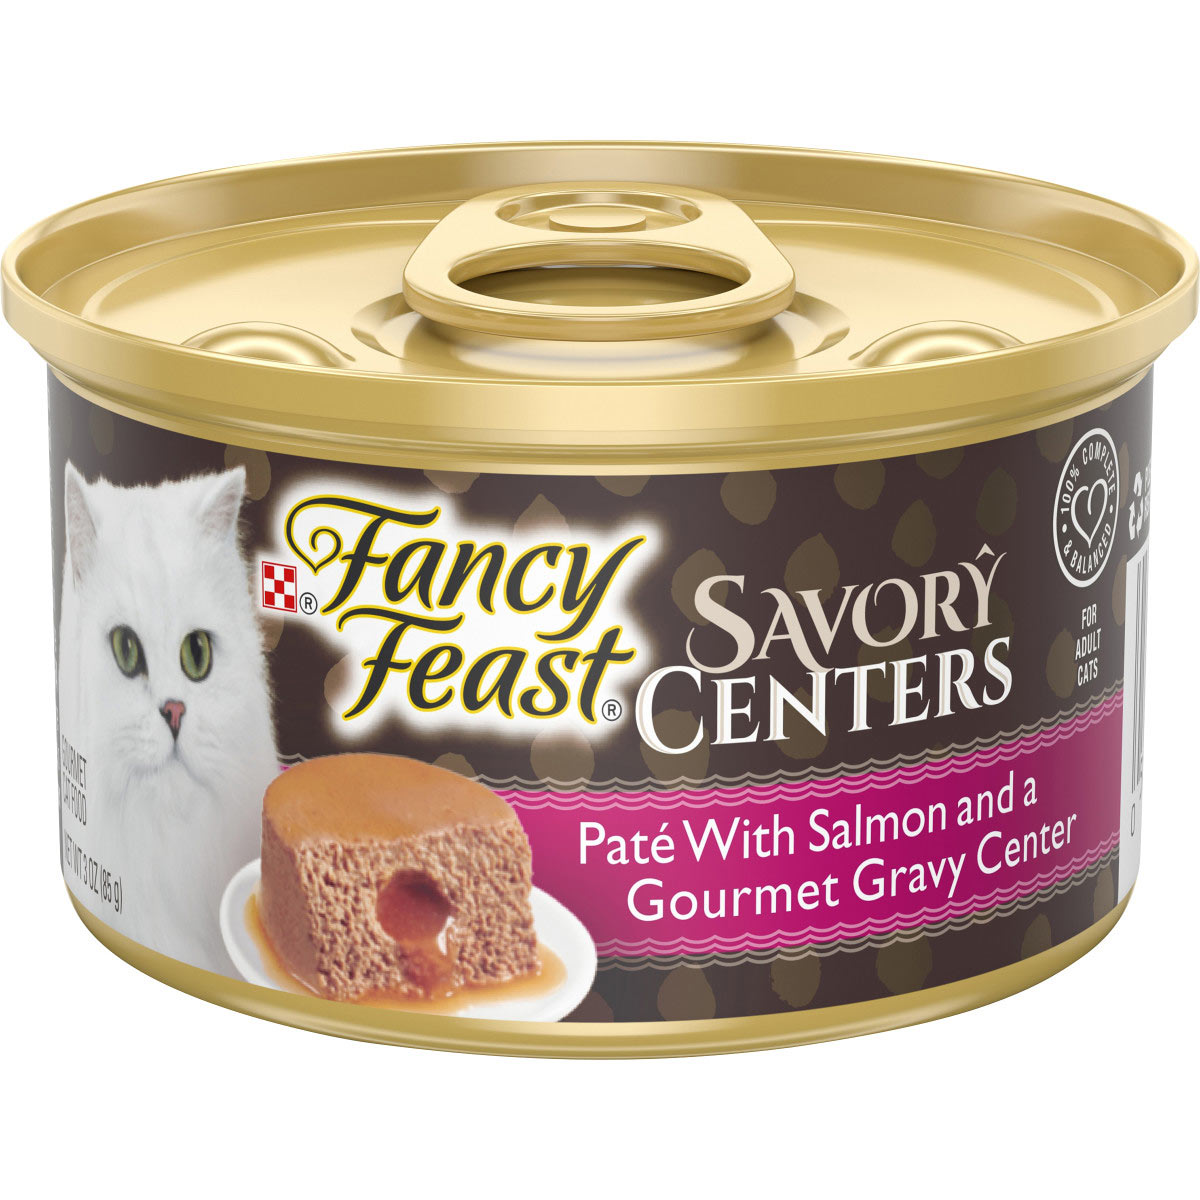 Purina Fancy Feast Pate Wet Cat Food, Savory Centers Pate With Salmon & Gourmet Gravy Center - 3 Ounce Can